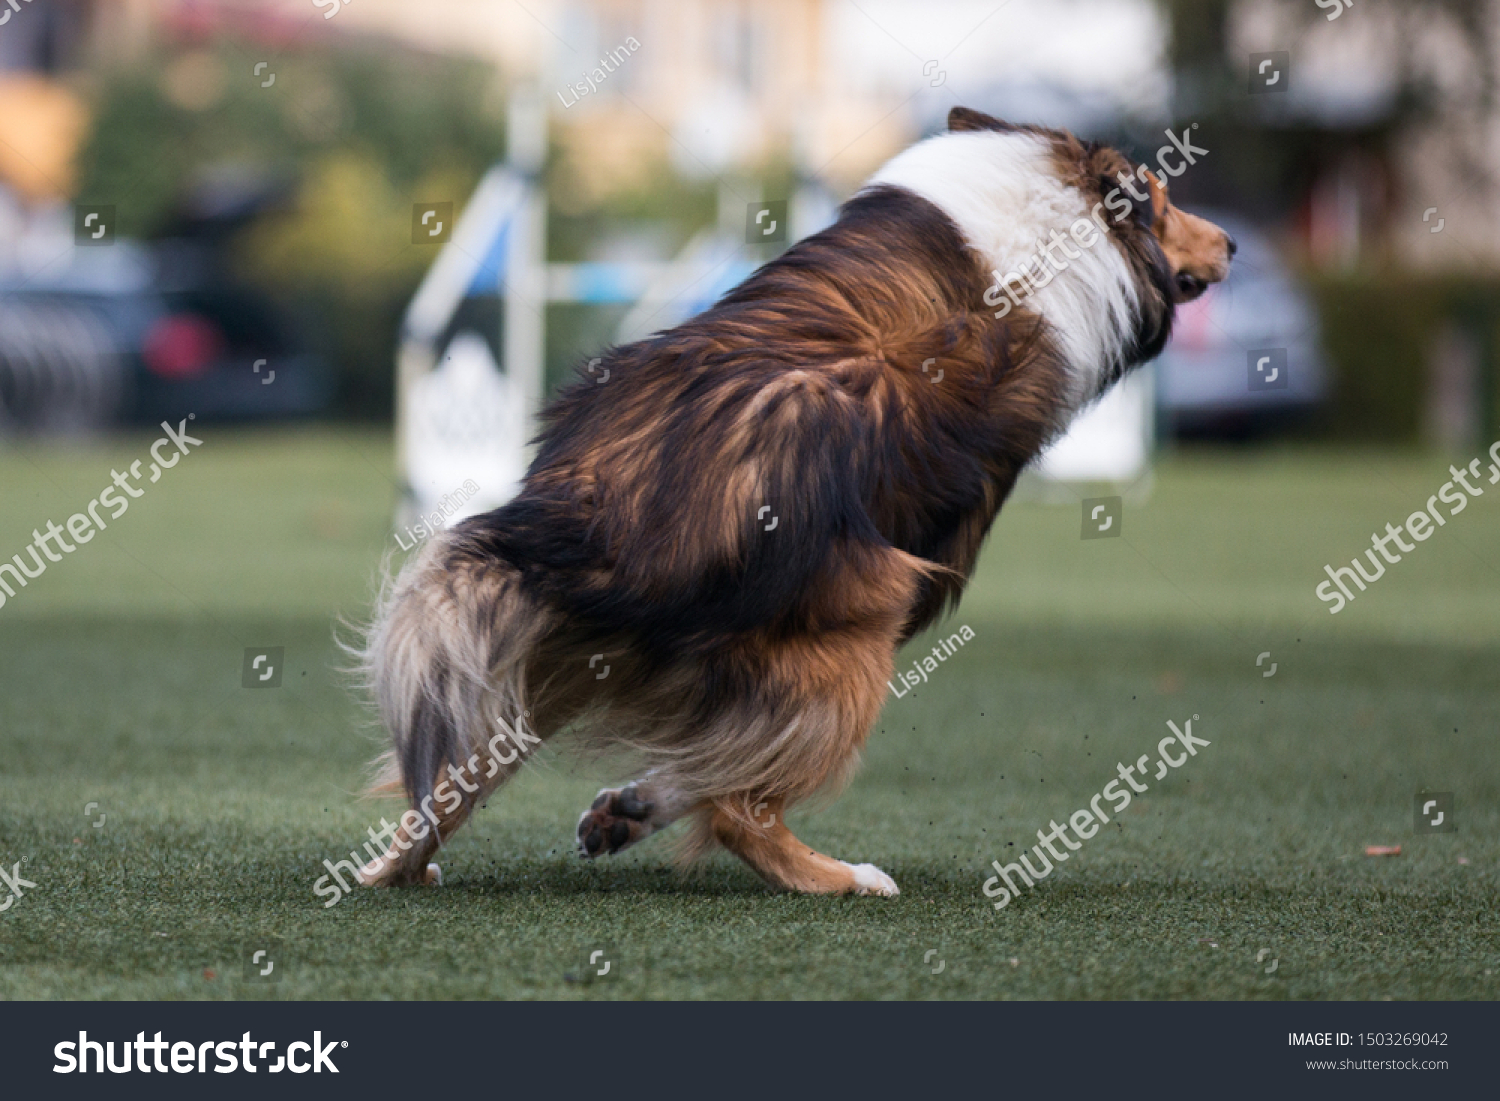 Purebred Active Sable White Long Haired Stock Photo Edit Now 1503269042